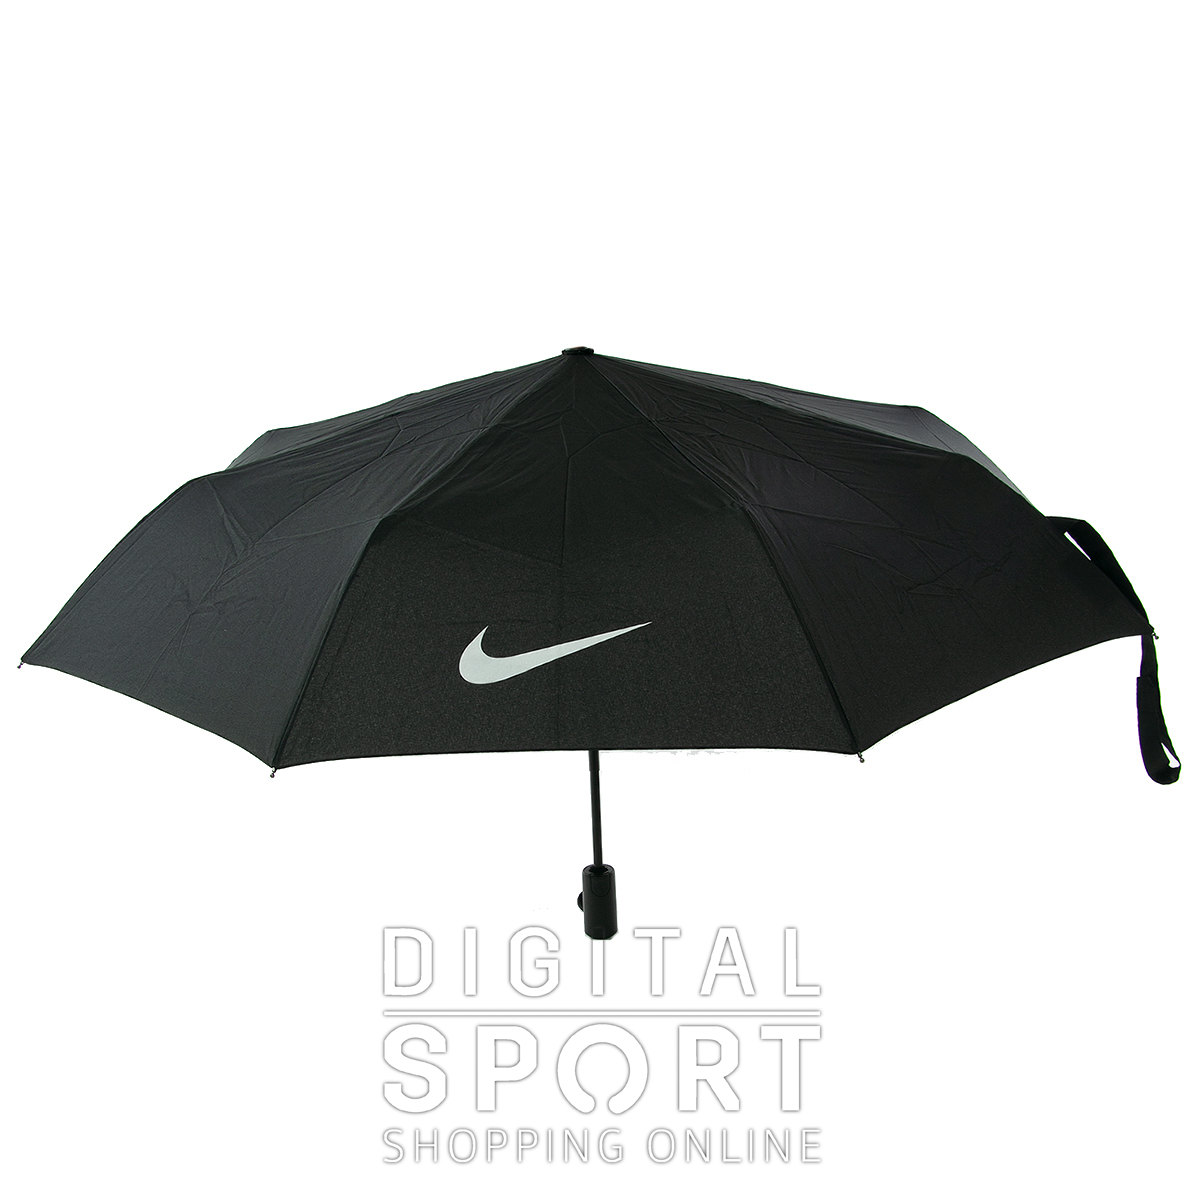 PARAGUAS COLLAPSIBLE 42 NIKE | SPORT 78